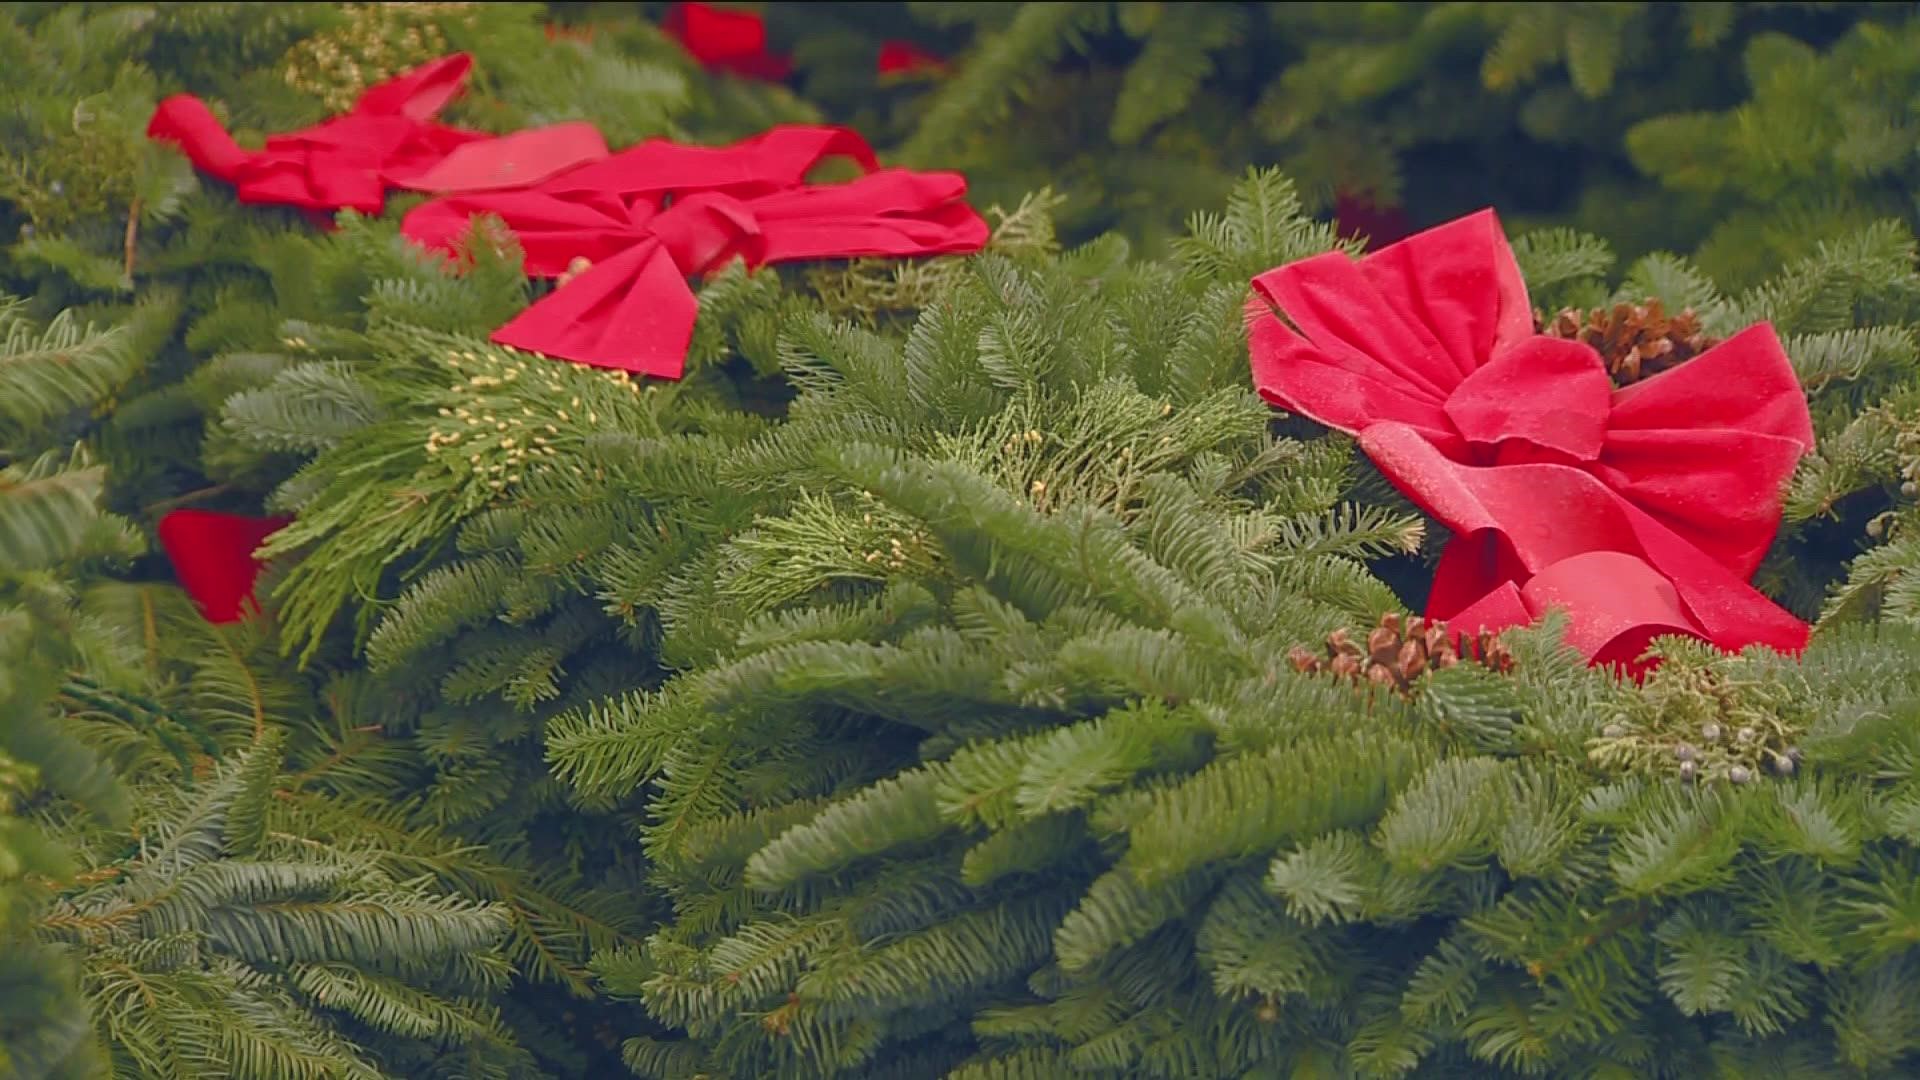 The business, Idaho Wreaths, hopes to continue for generations.